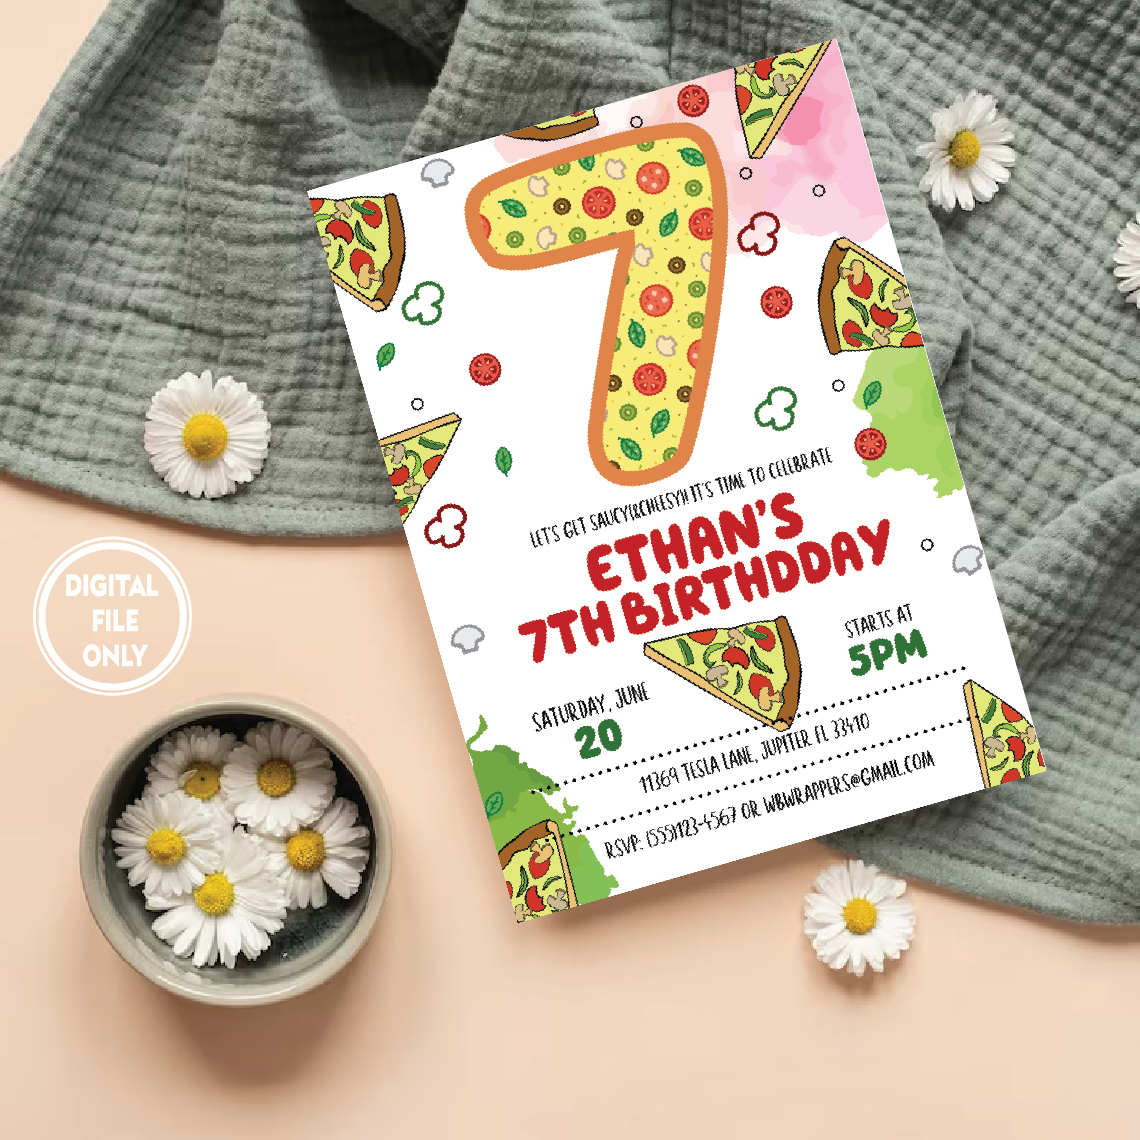 Personalized File Pizza Party, Pizza Birthday Invitation for Pizza Party theme - Digital Download Invitations, Instant Download, DIY  PNG File Only